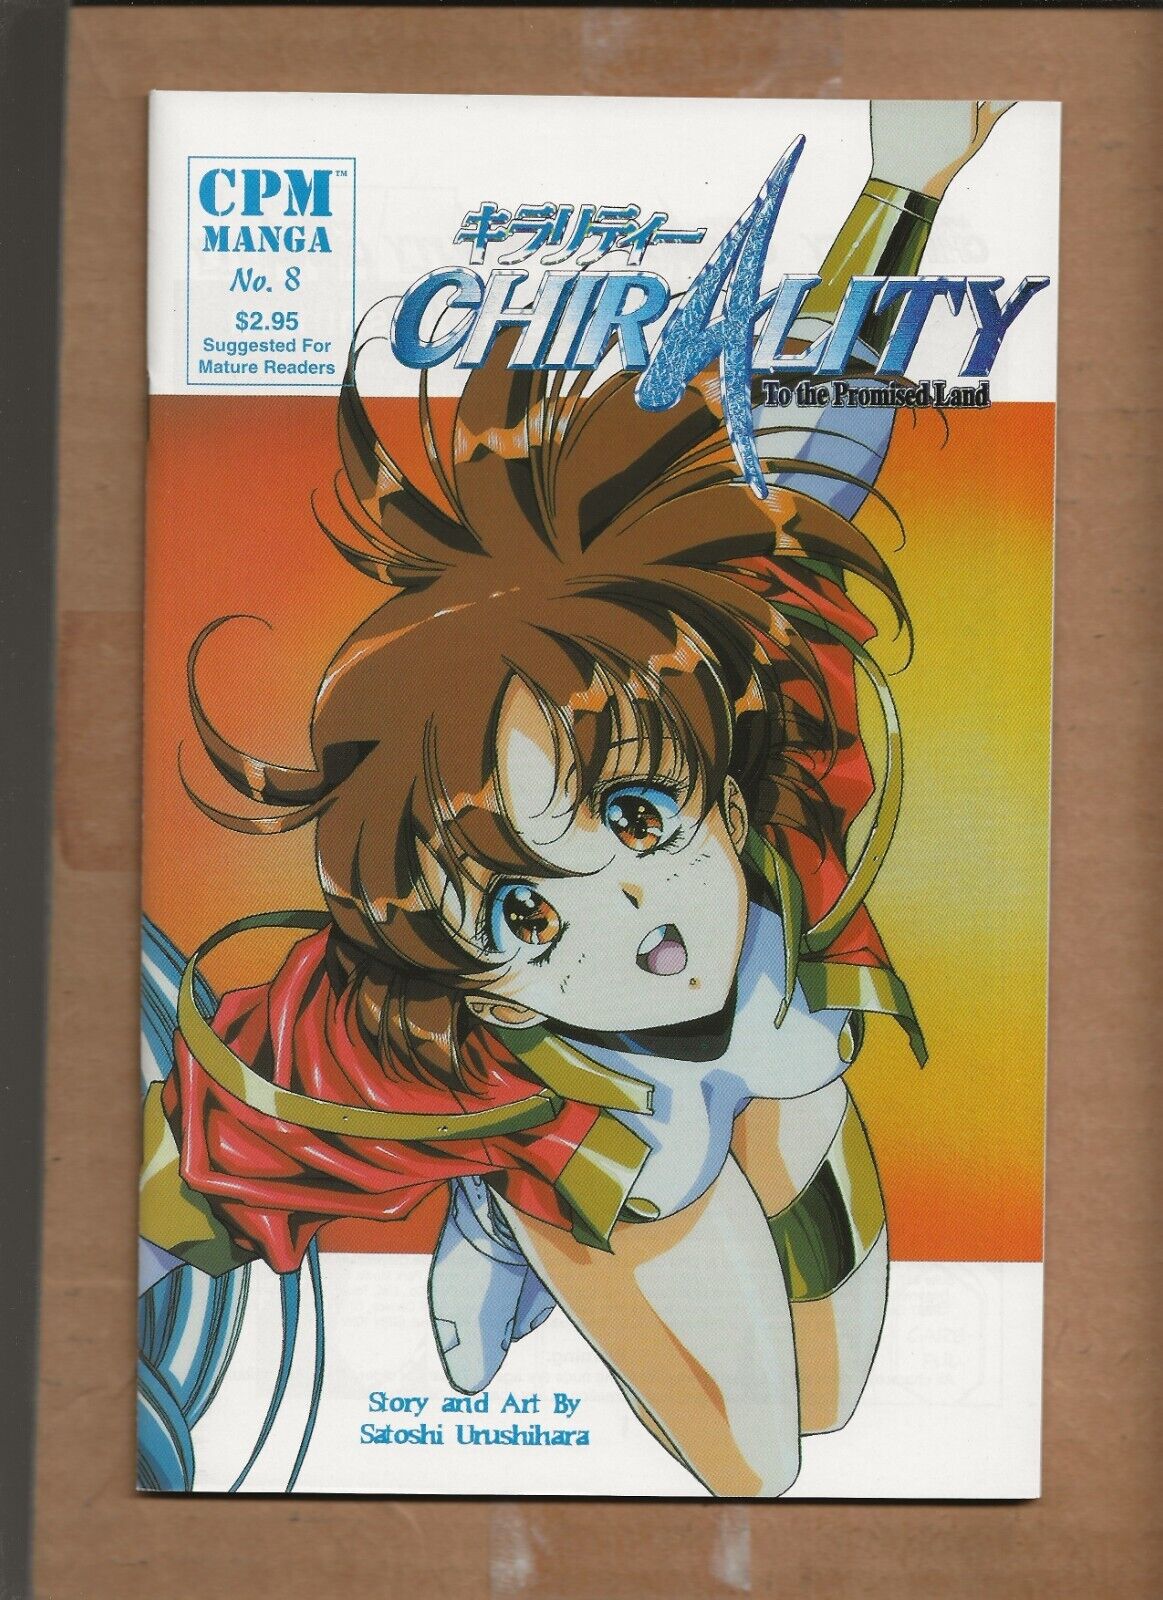 CHIRALITY TO THE PROMISED LAND #8 CPM MANGA